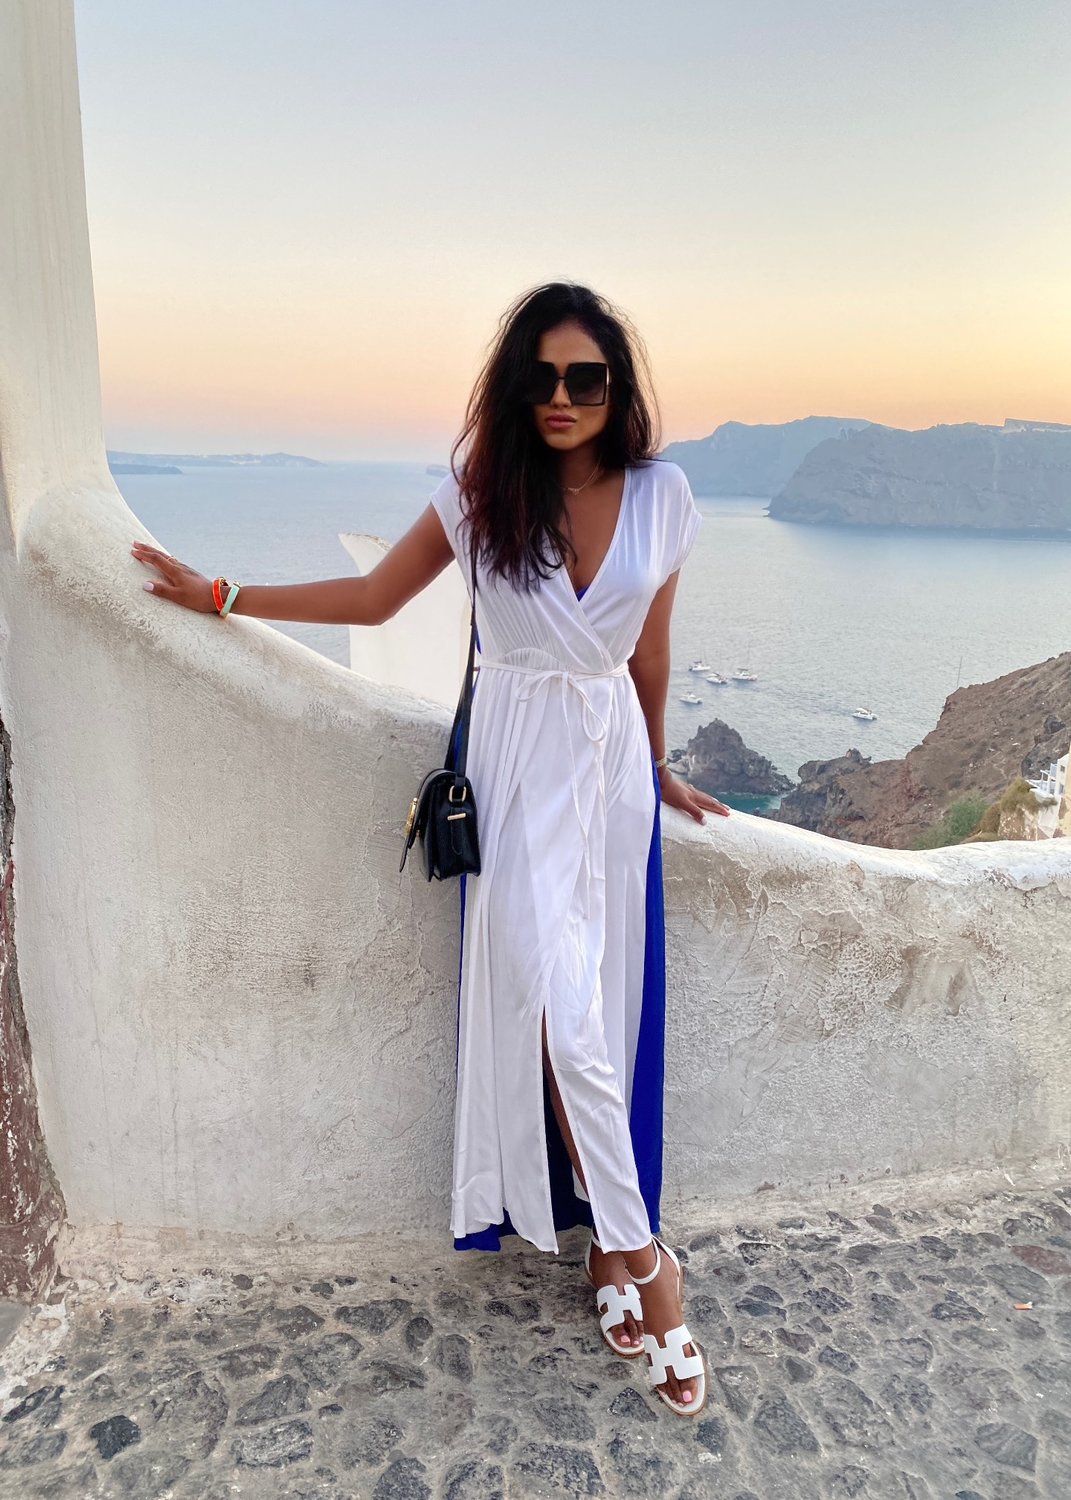 Sachini wearing sunglasses, a blue and white Ioanna Kourbela dress and white Hermes sandals with in the background a sea and sunset